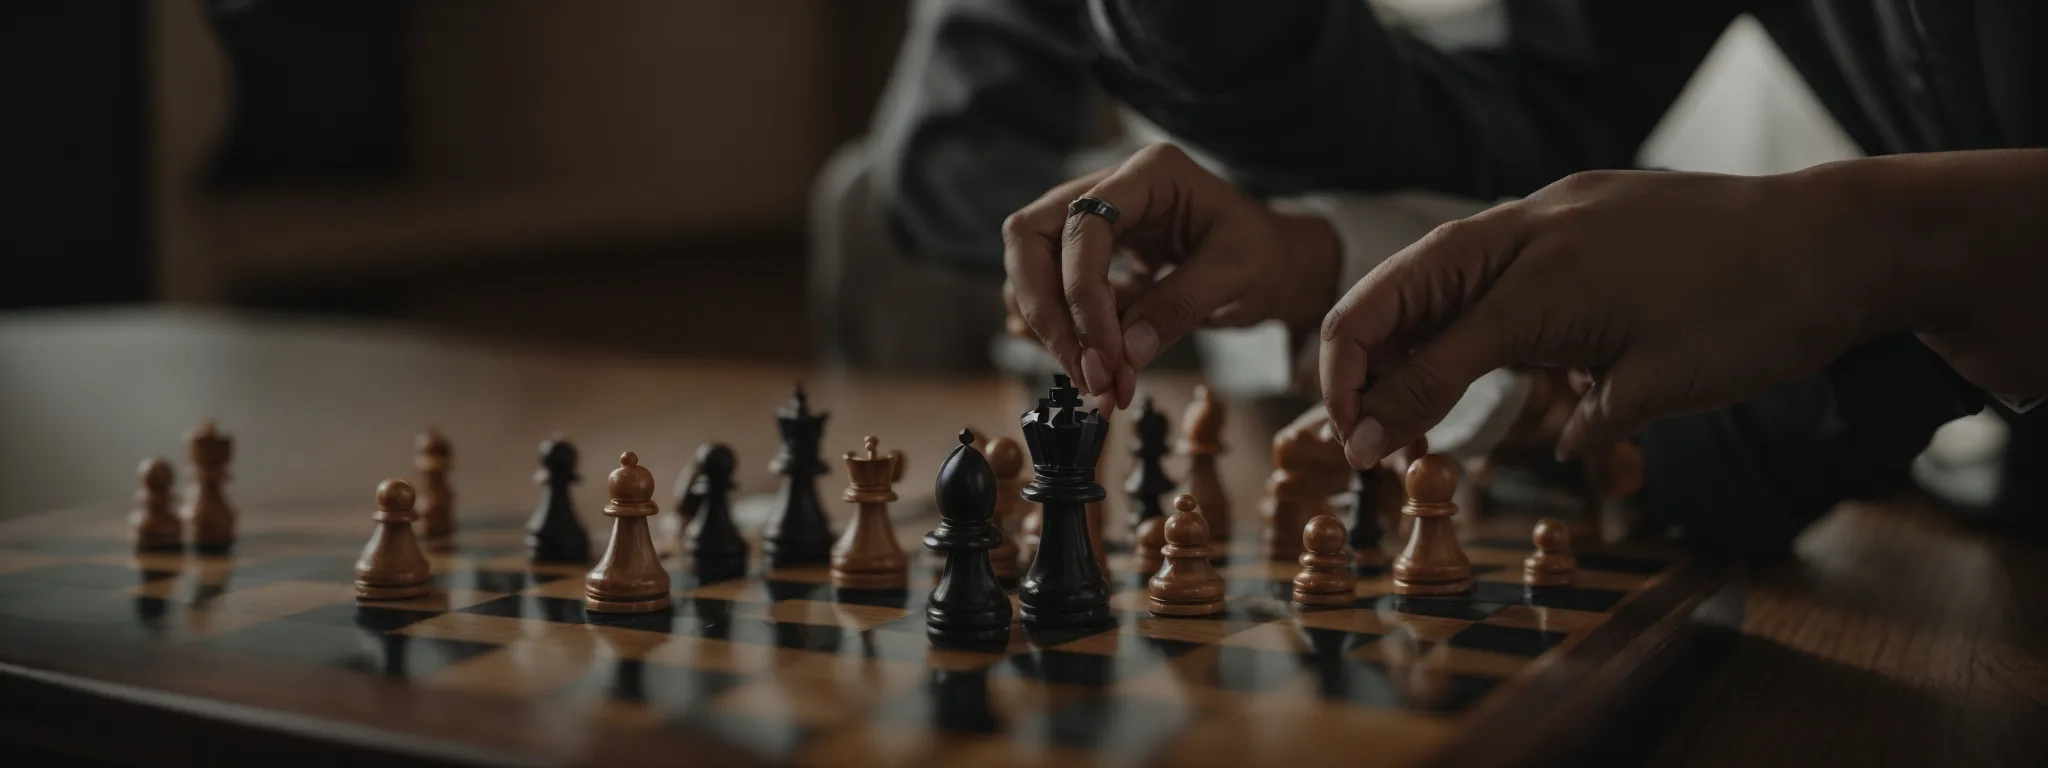 a marketer strategically places a chess piece on a board, symbolizing the calculated moves in content marketing for seo success.